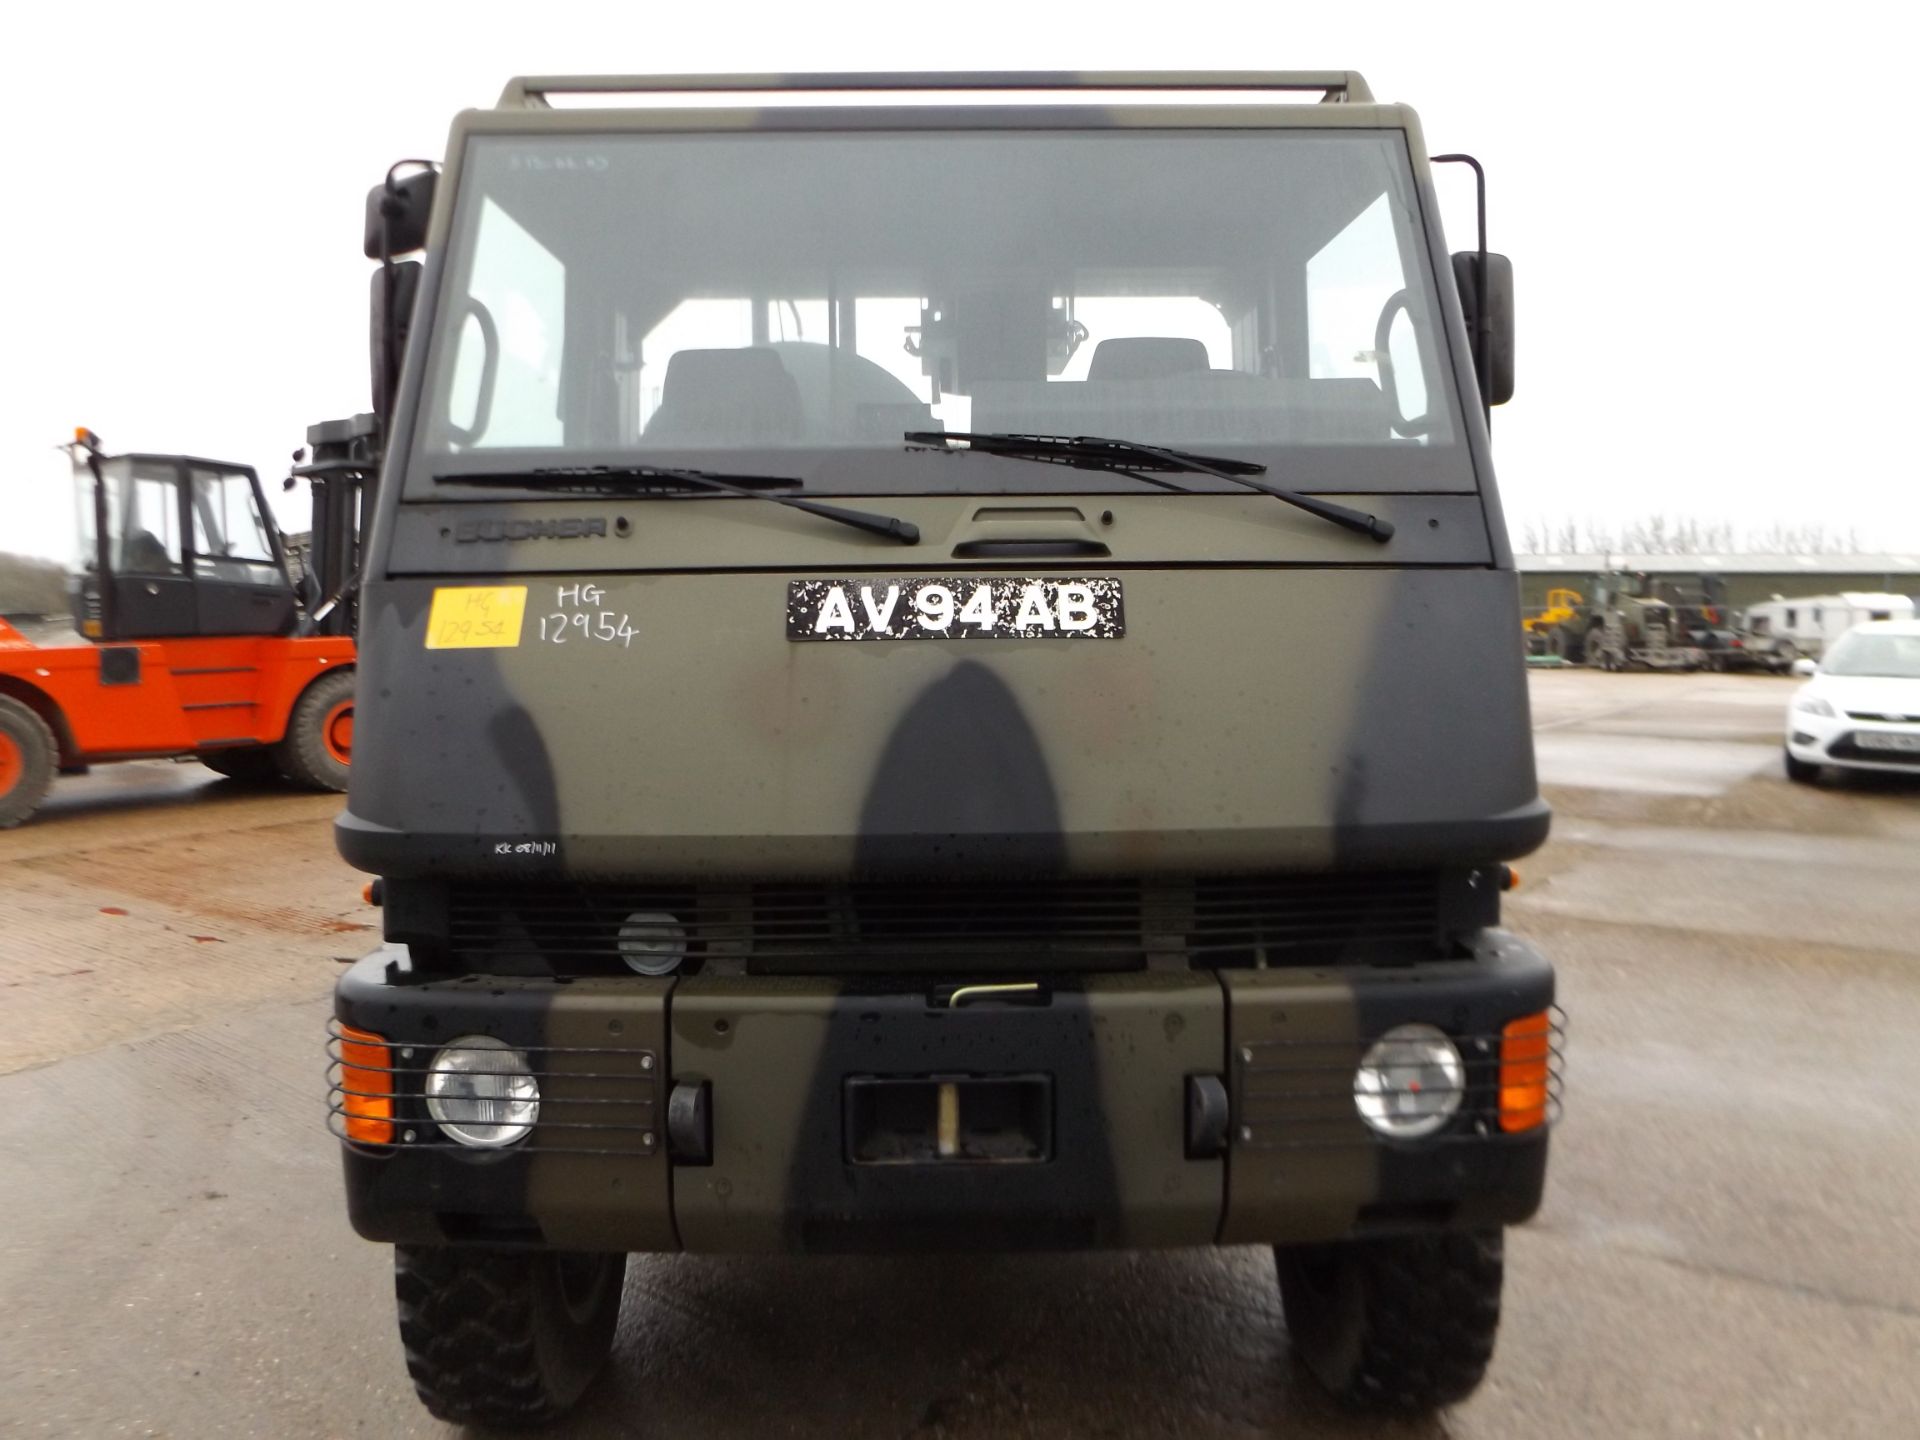 Ex Reserve Left Hand Drive Mowag Bucher Duro II 6x6 High-Mobility Tactical Vehicle - Image 2 of 12